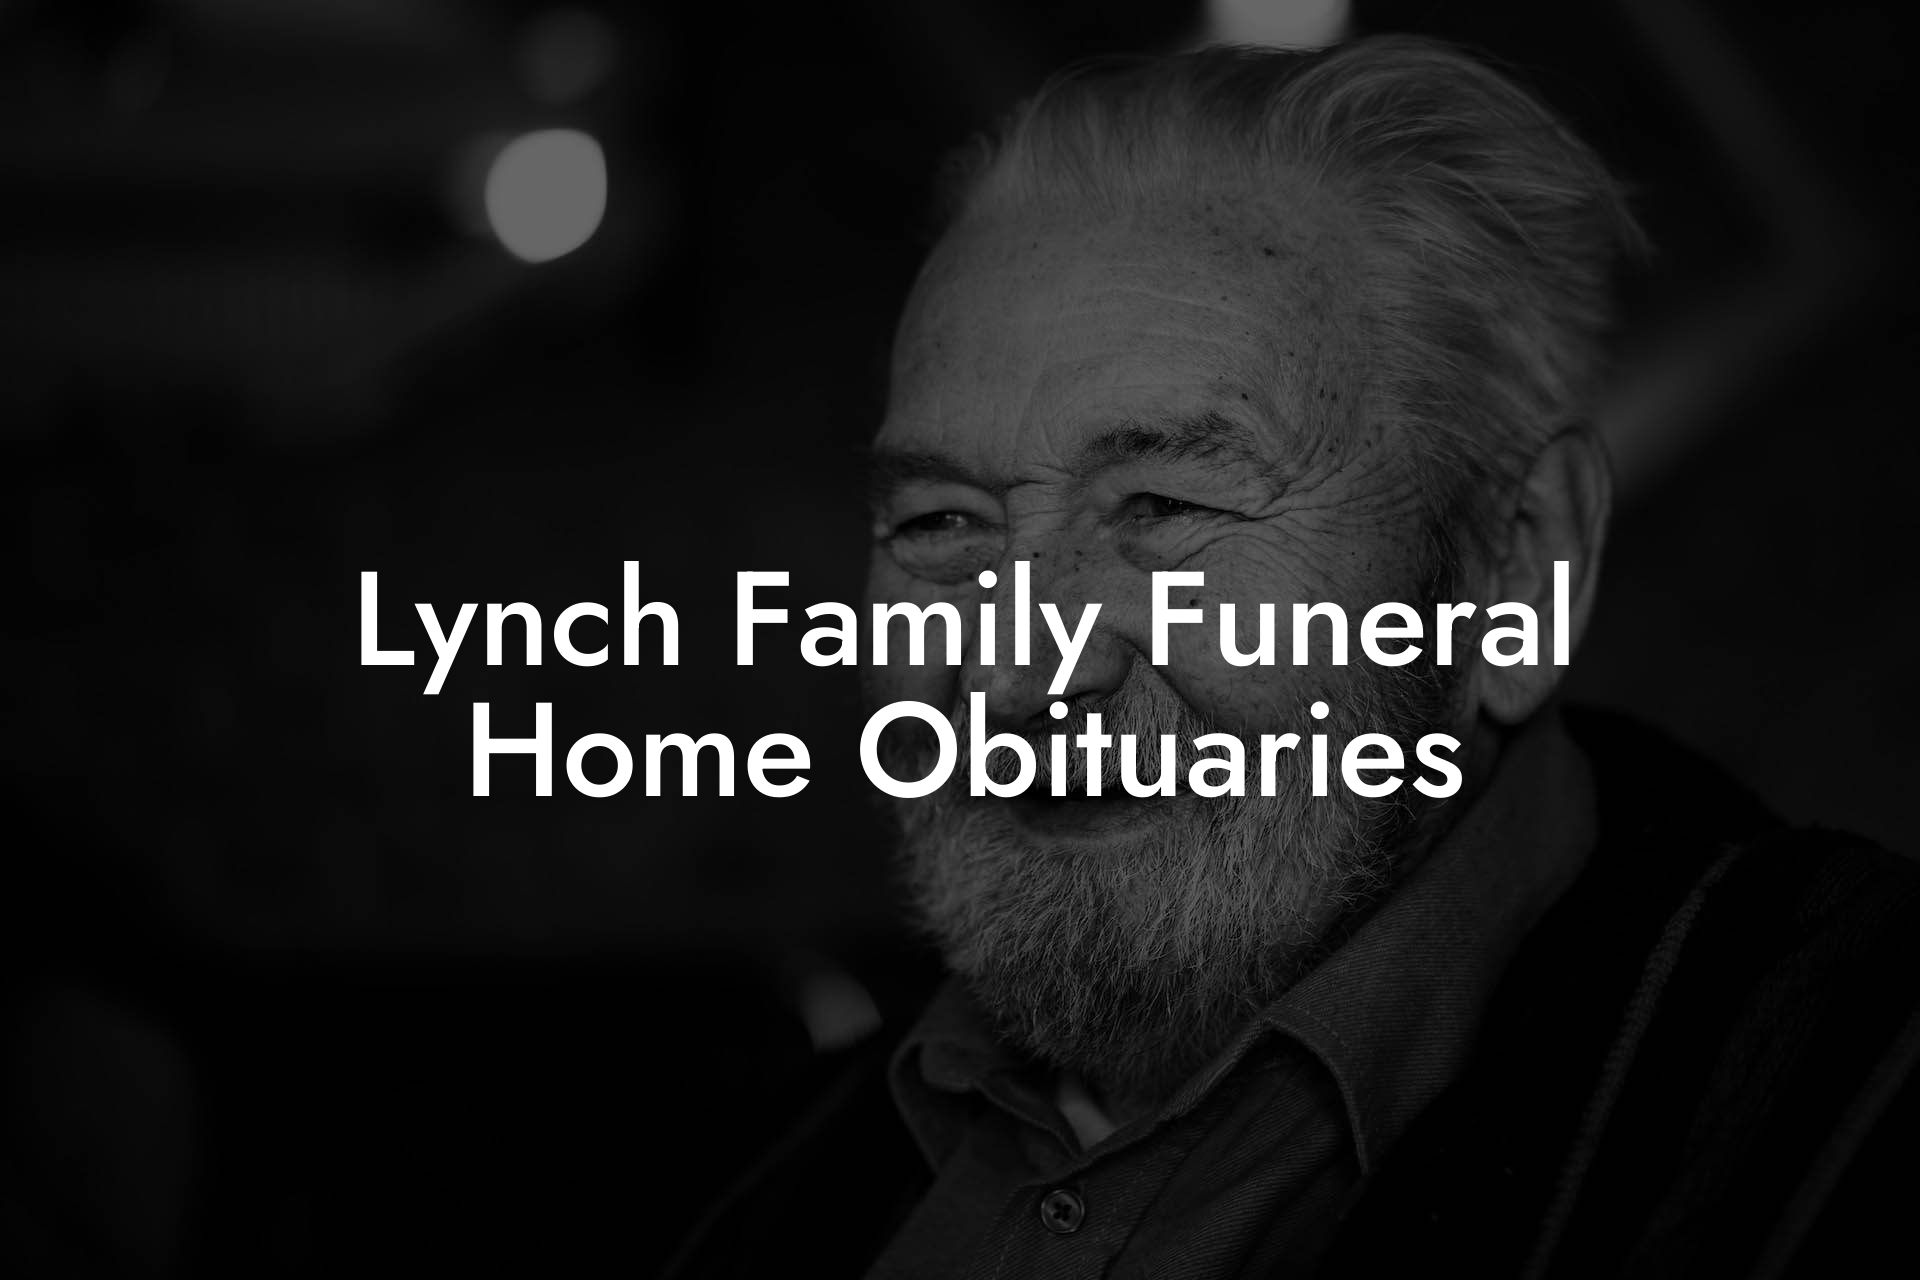 Lynch Family Funeral Home Obituaries